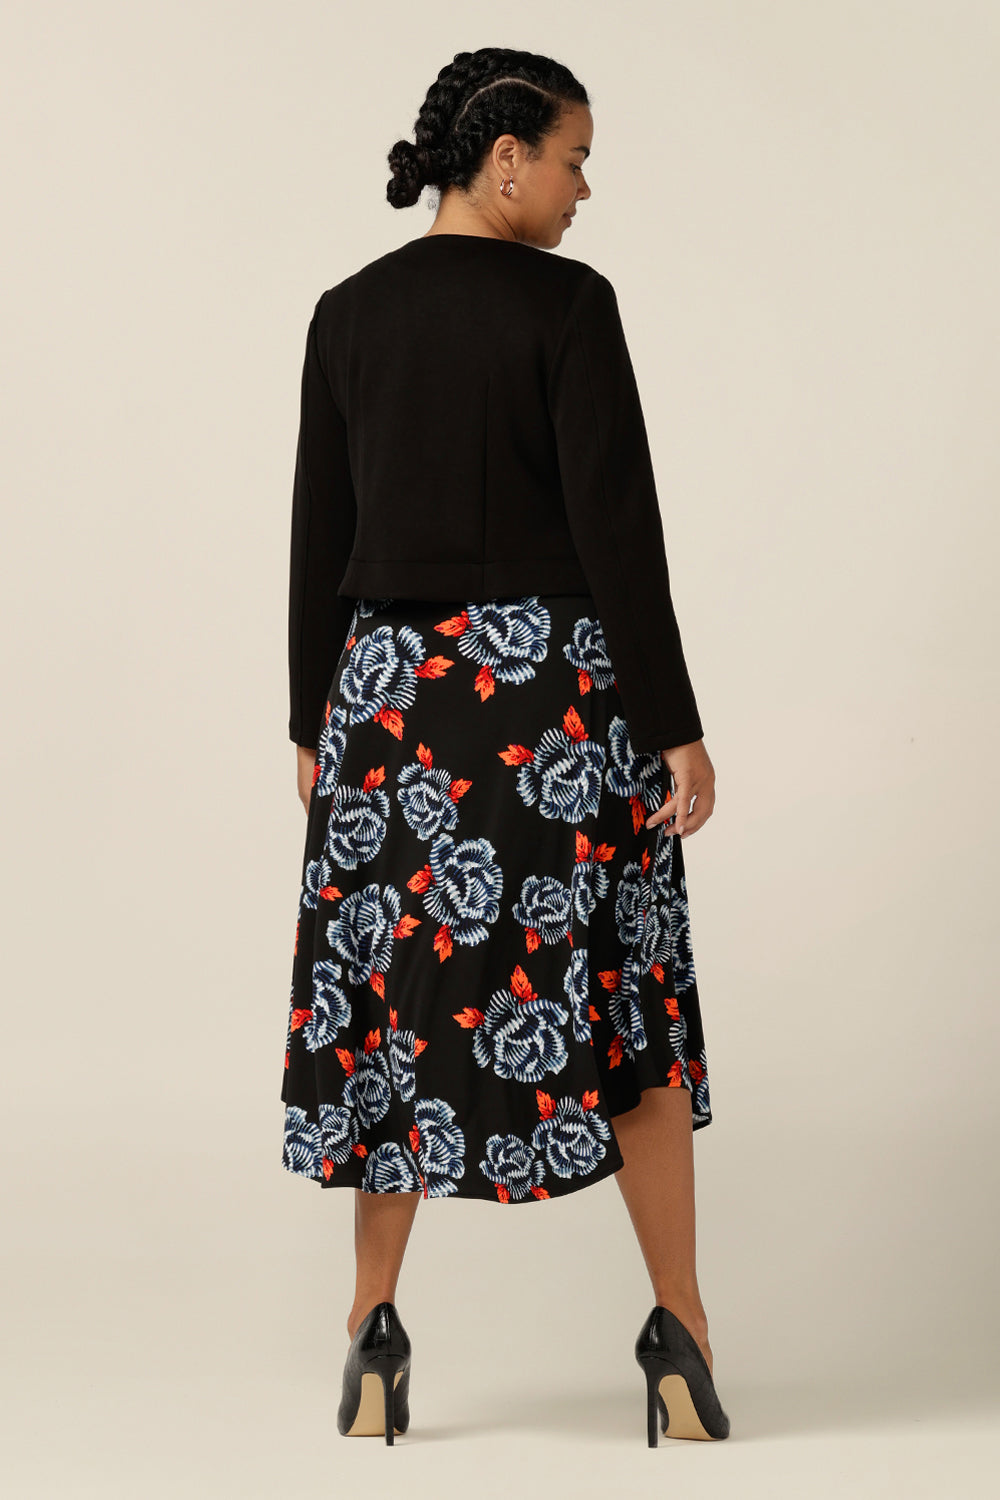 Wear it for work - a 3/4 sleeve, empire line dress in black-base floral print jersey is worn under a black soft tailoring jacket. shop L&F work dresses and jackets in sizes 8 to size 24.